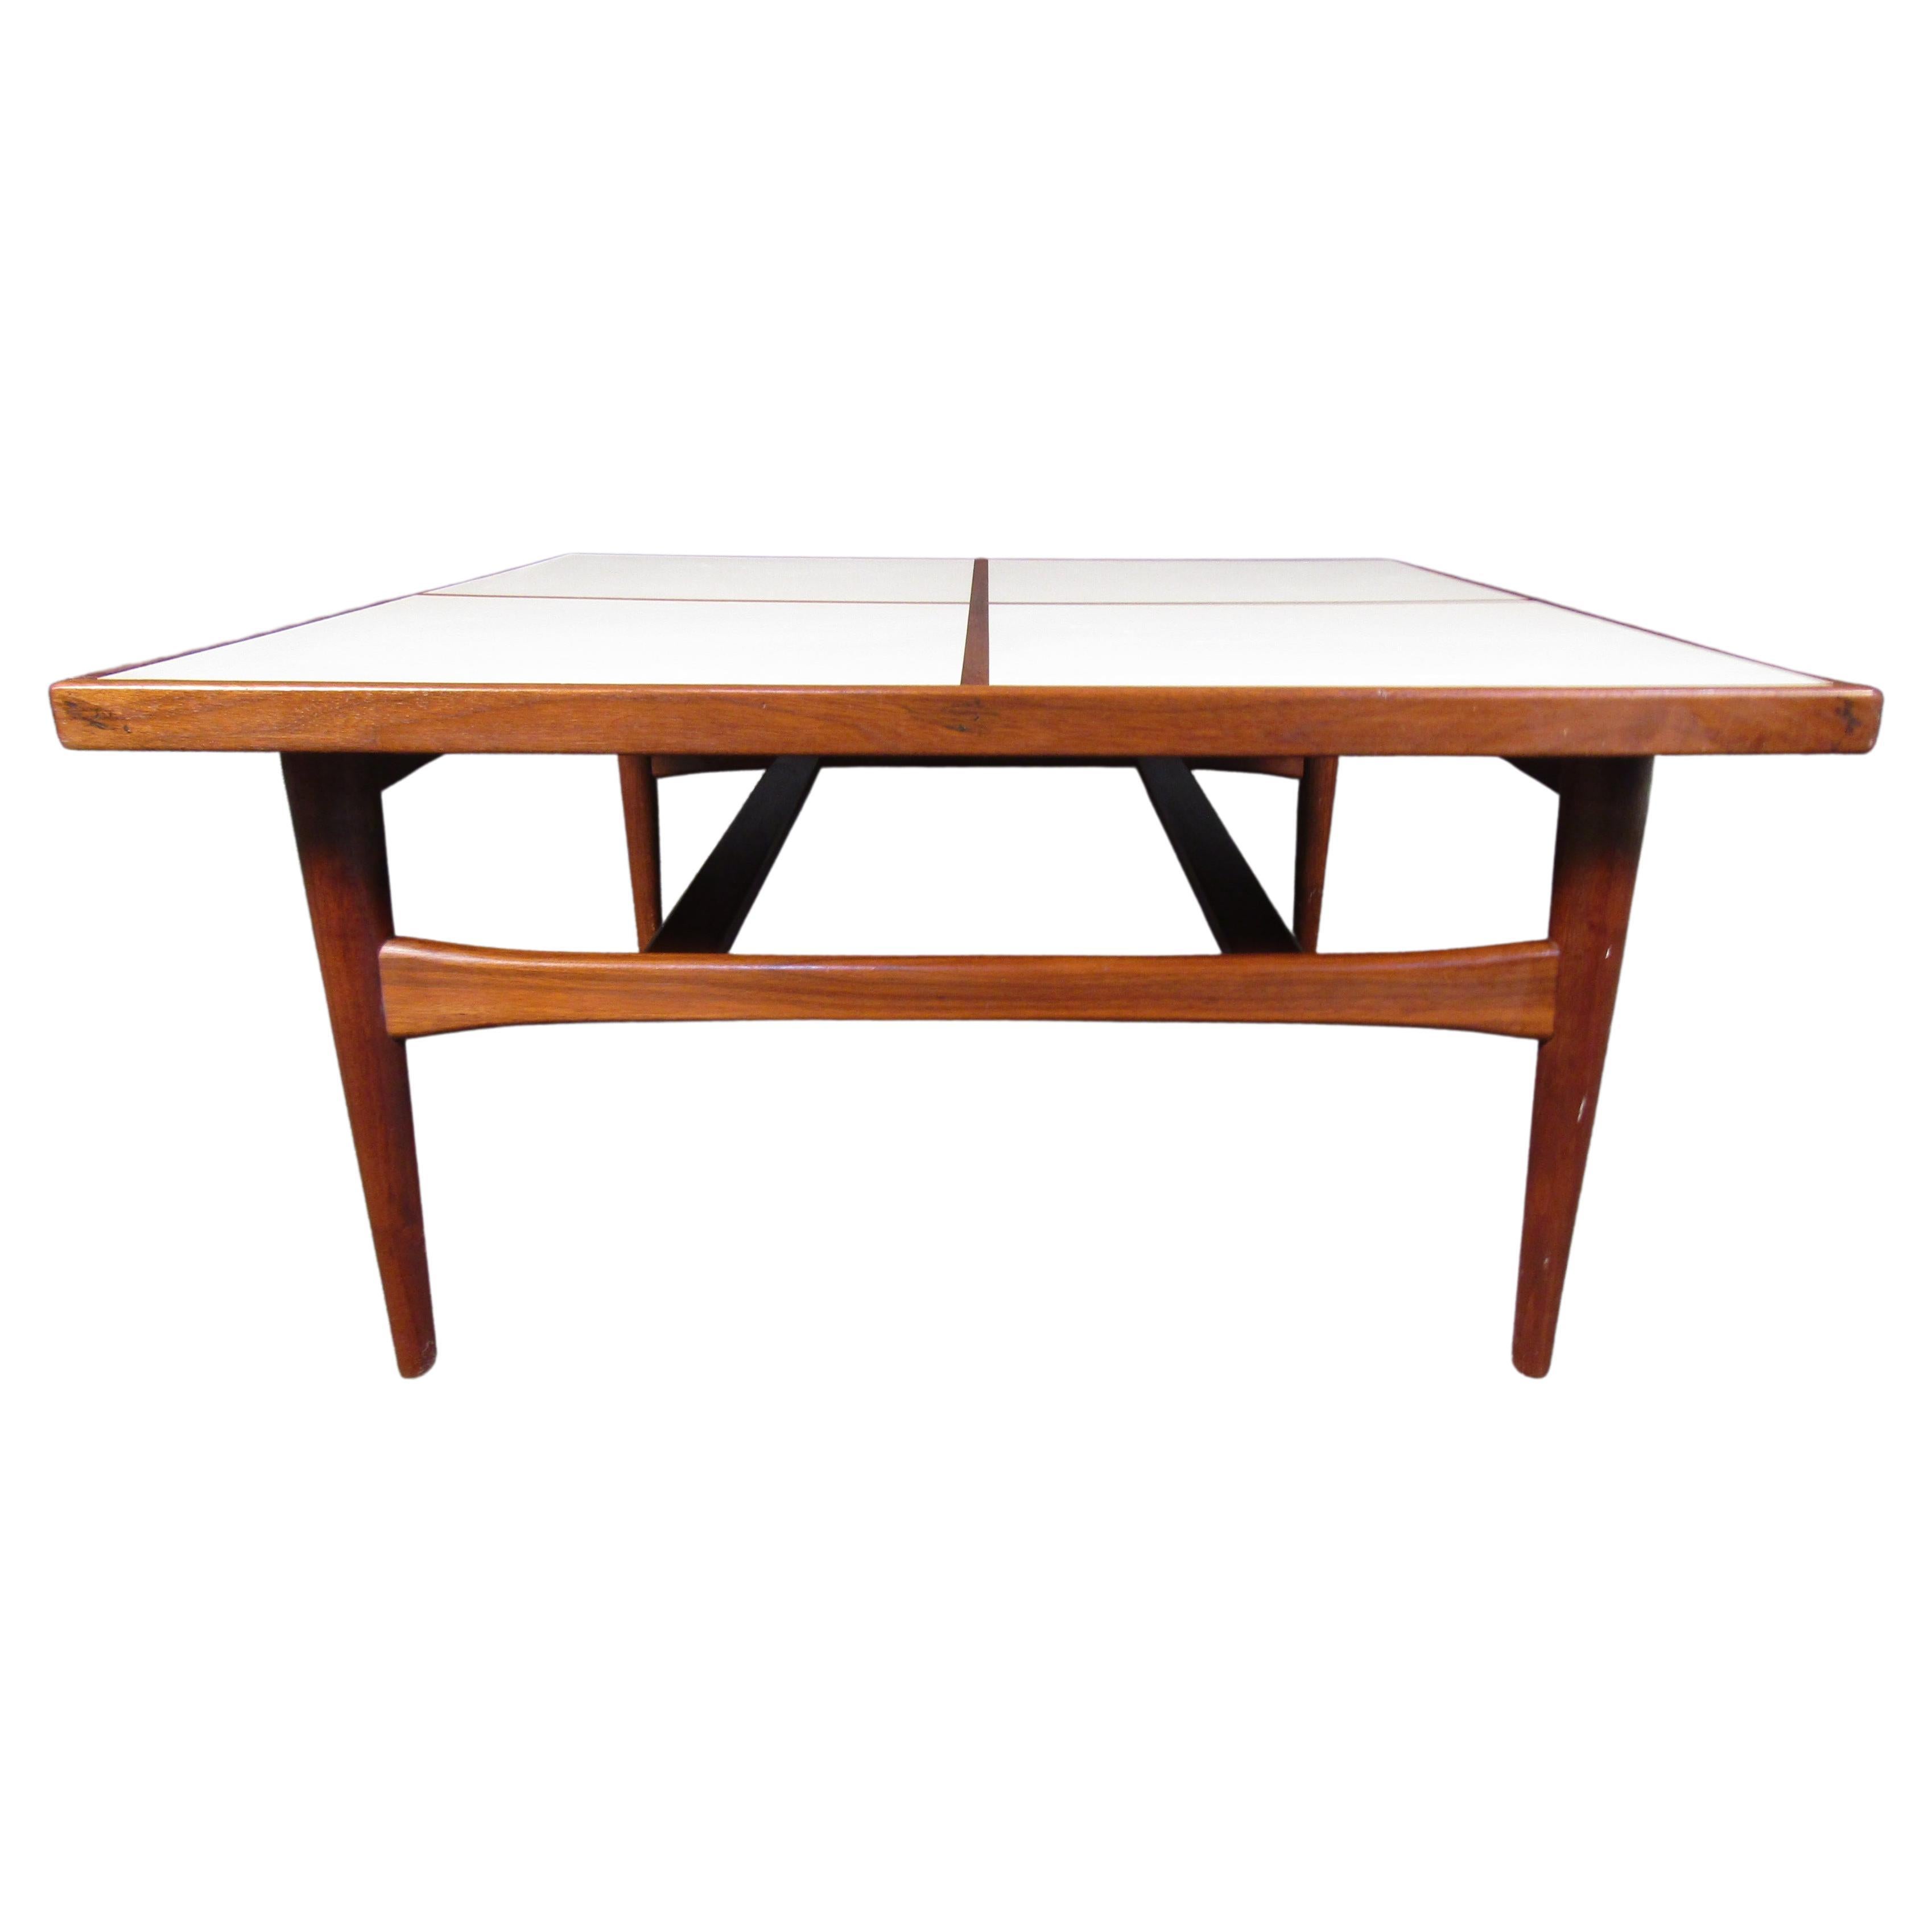 This vintage walnut coffee table is full of Mid-Century style, with a surface of contrasting white panels. Please confirm item location with seller (NY/NJ).